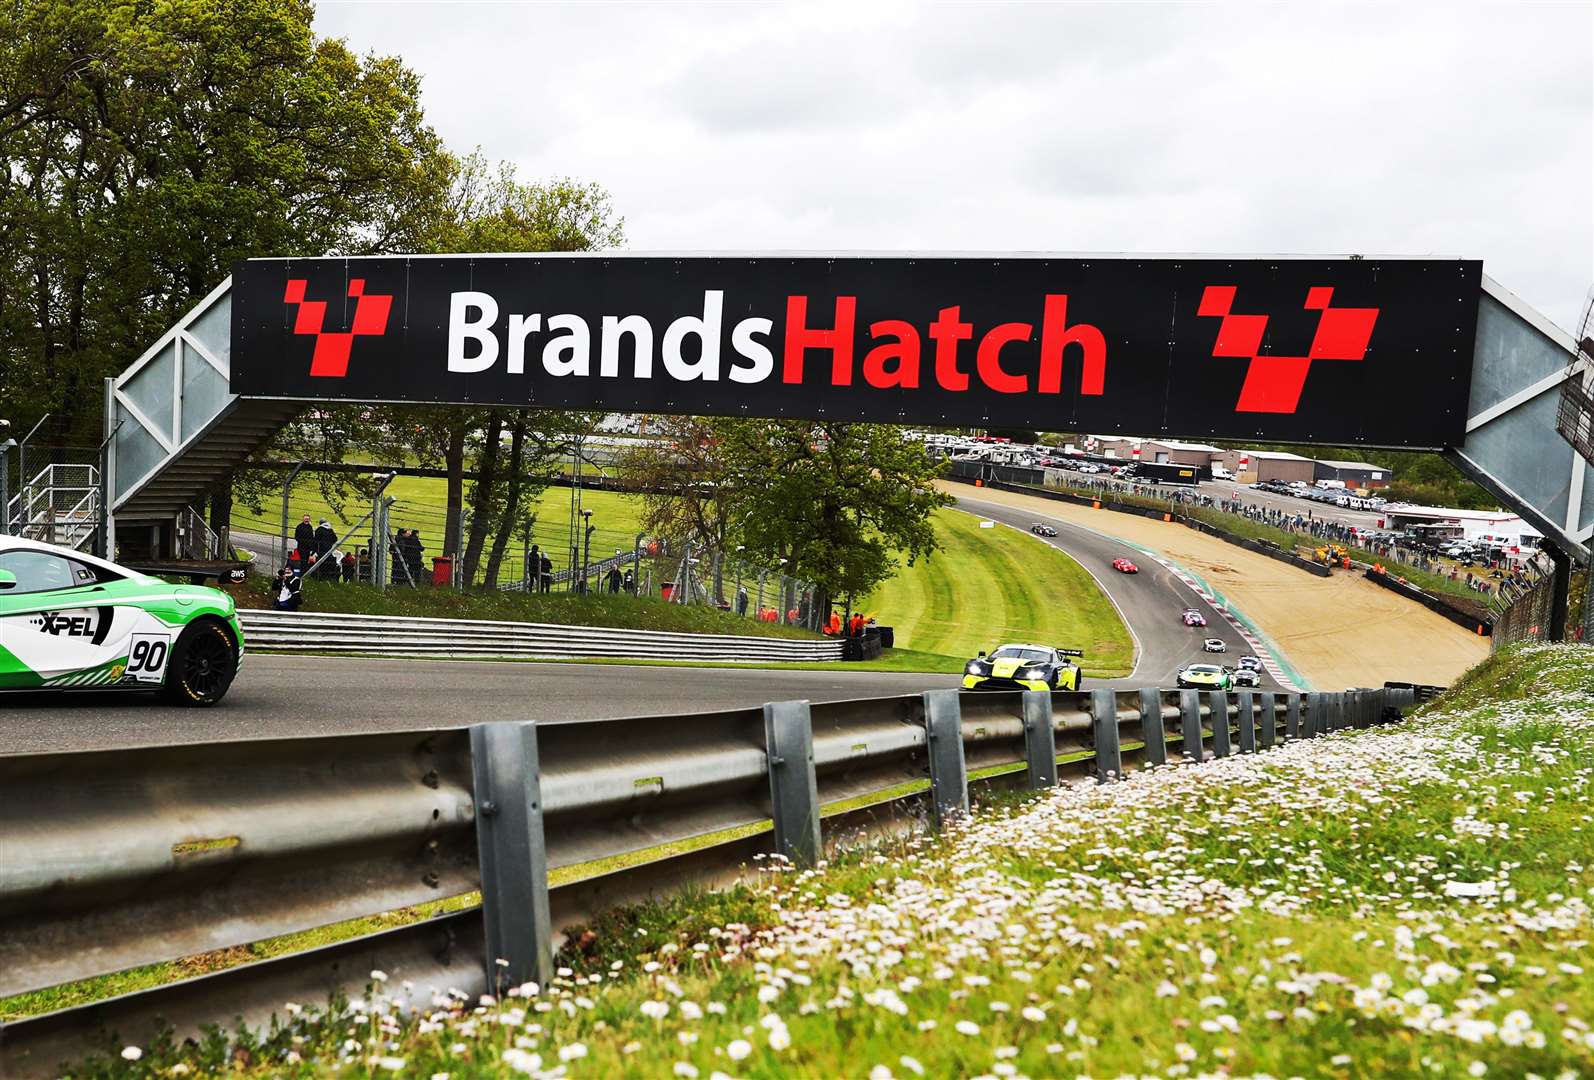 Emergency services are at the scene of a serious crash at Brands Hatch